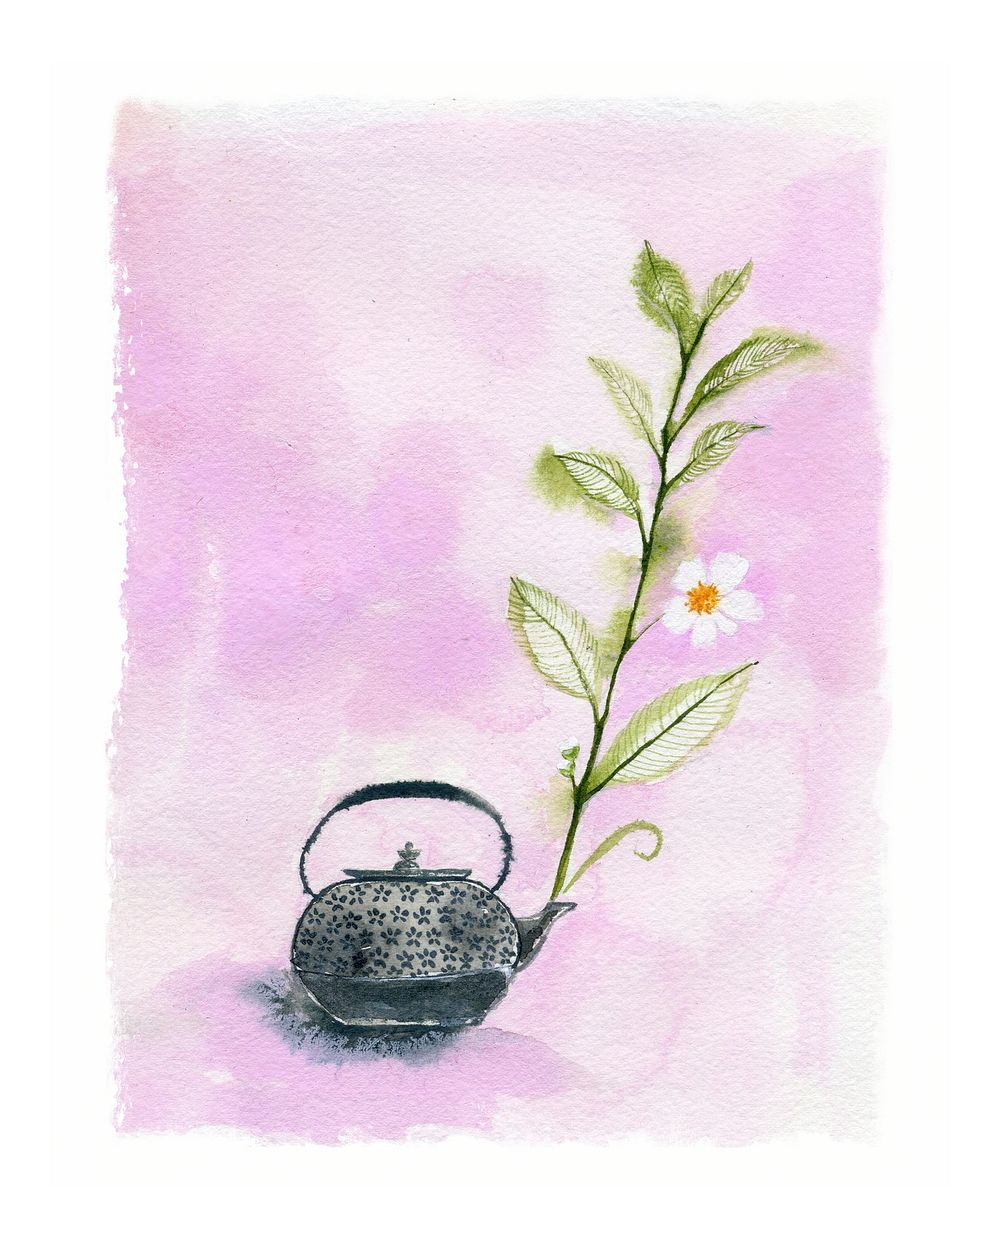 Flower in a kettle wall art print and poster.